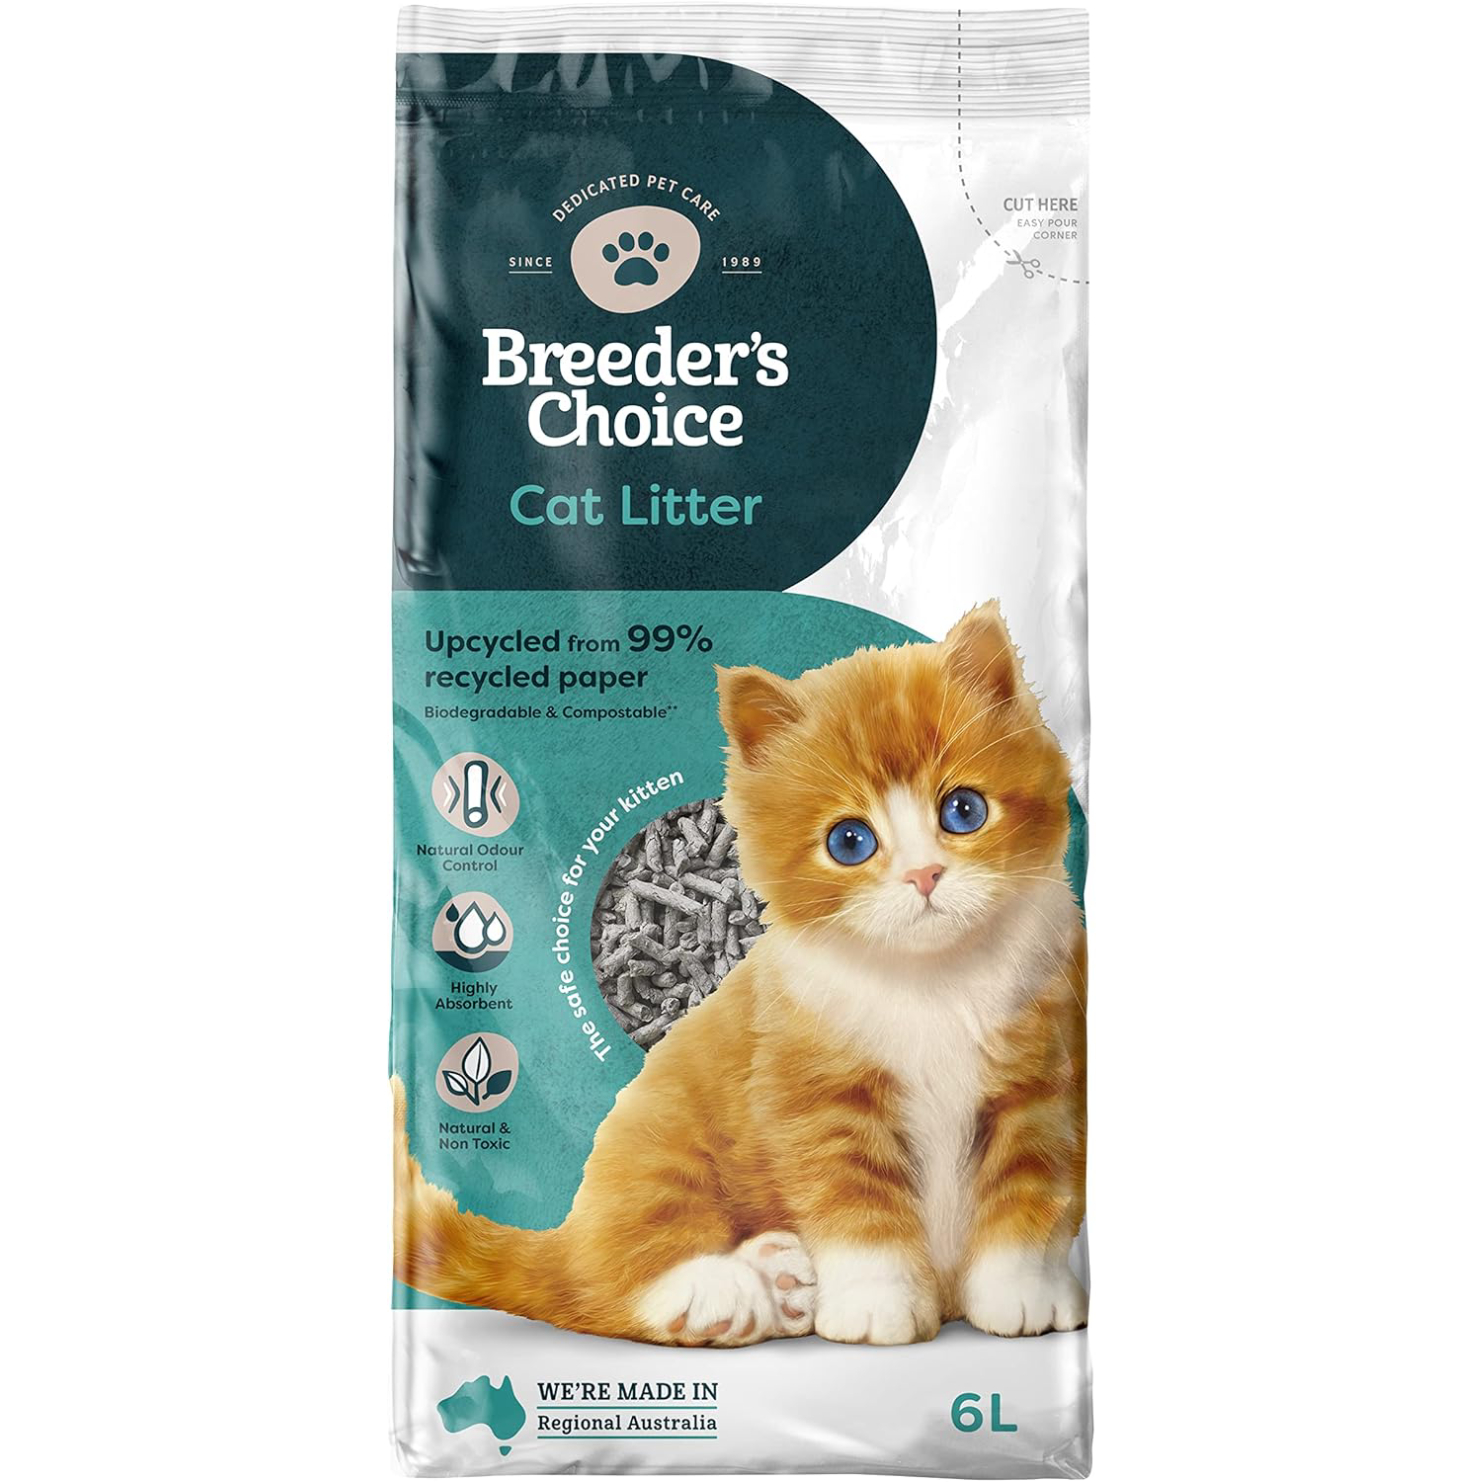 Breeders Choice 99% Recycled Paper Cat Litter